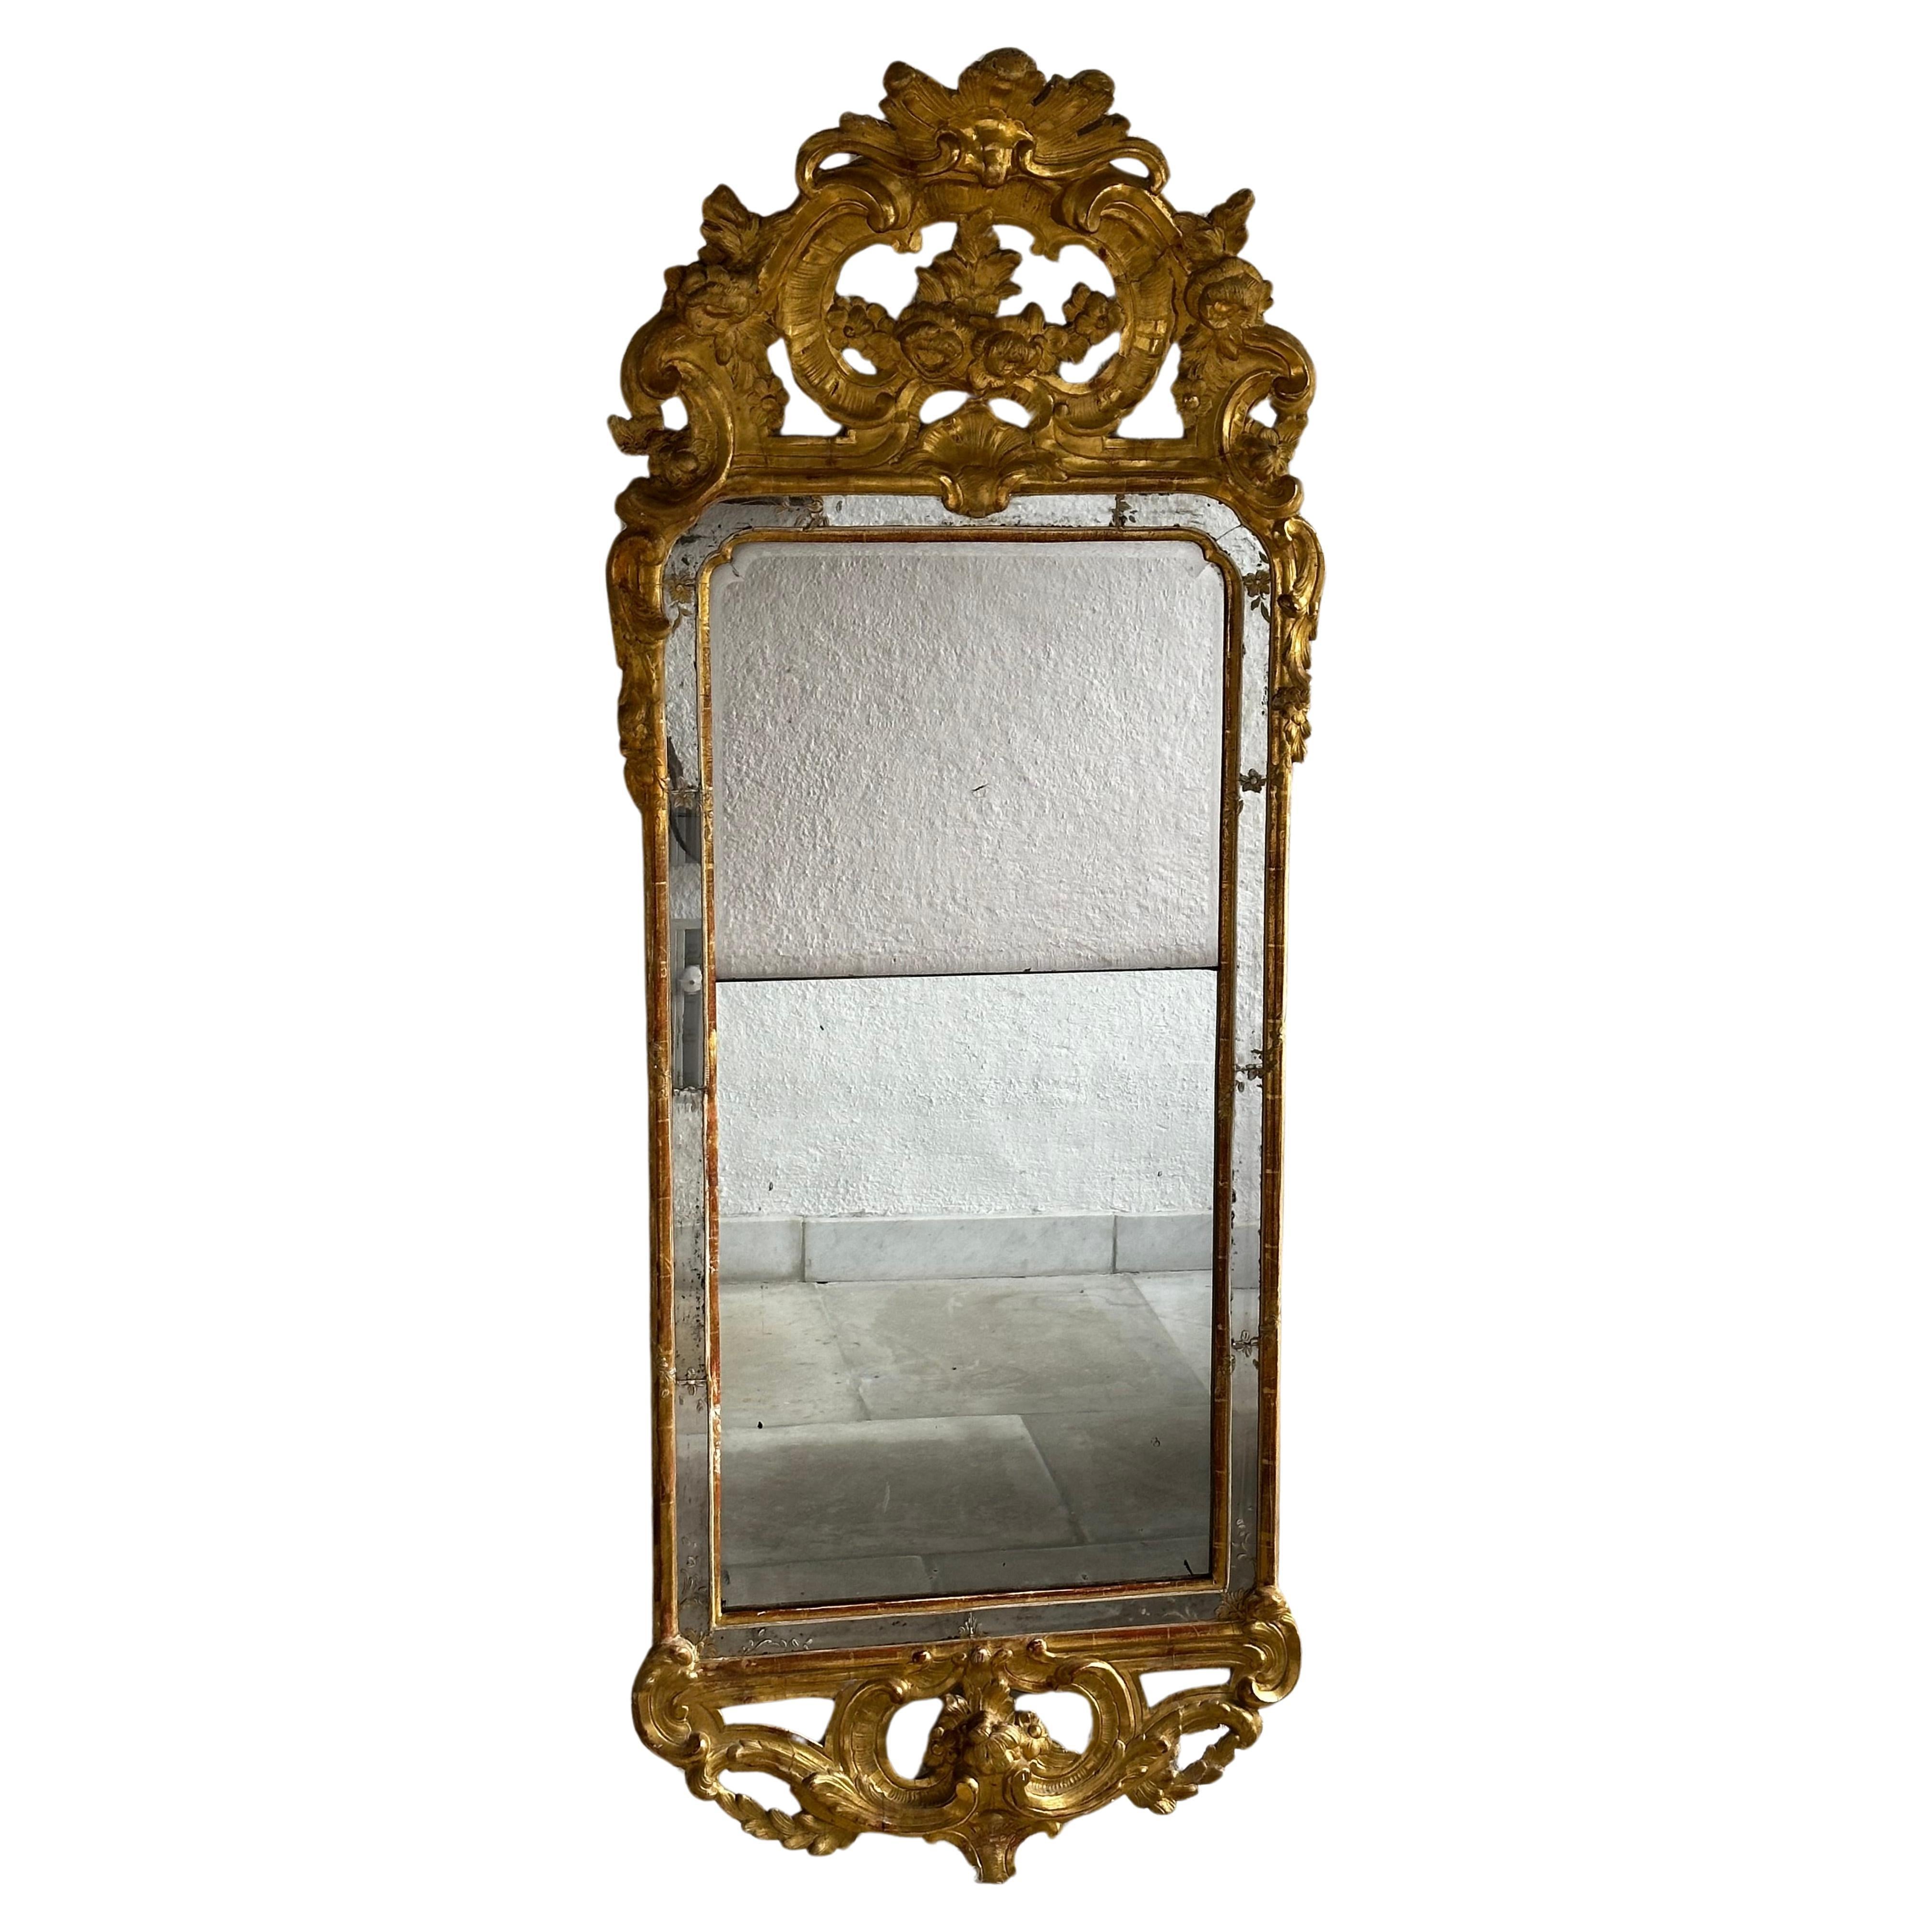 A large mirror attributed to Johan Åkerblad, not signed. He were a mirror manufacturer in Stockholm 1758- 1799. Decor made in paper mache´. 
The top has decoration with acanthus, rocaille and volutes.